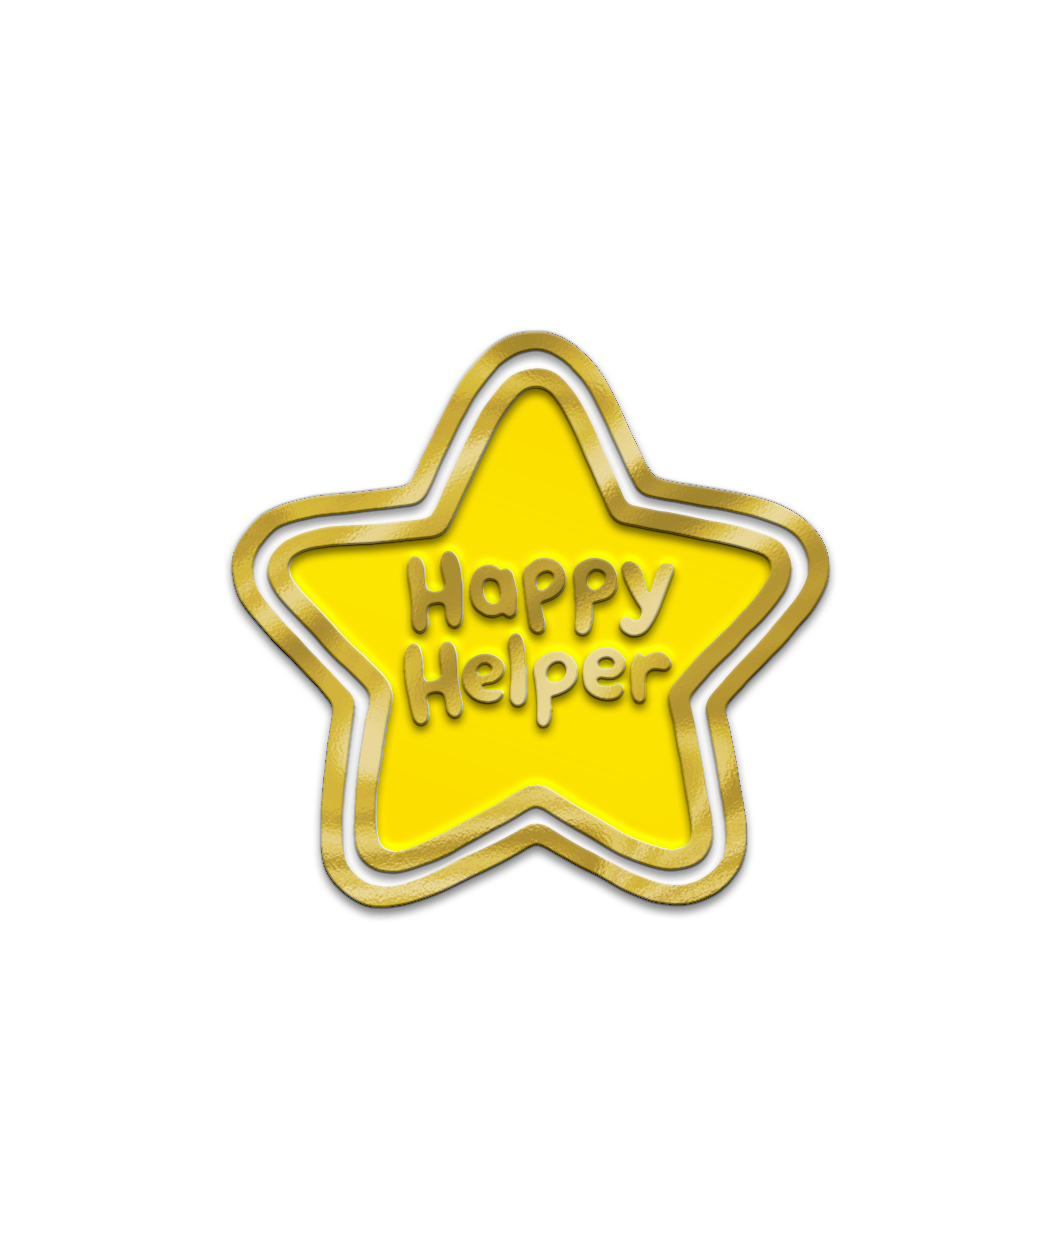 Gold plated enamel pin of a star. It has a yellow enamel star in the middle with gold plated text that says, 